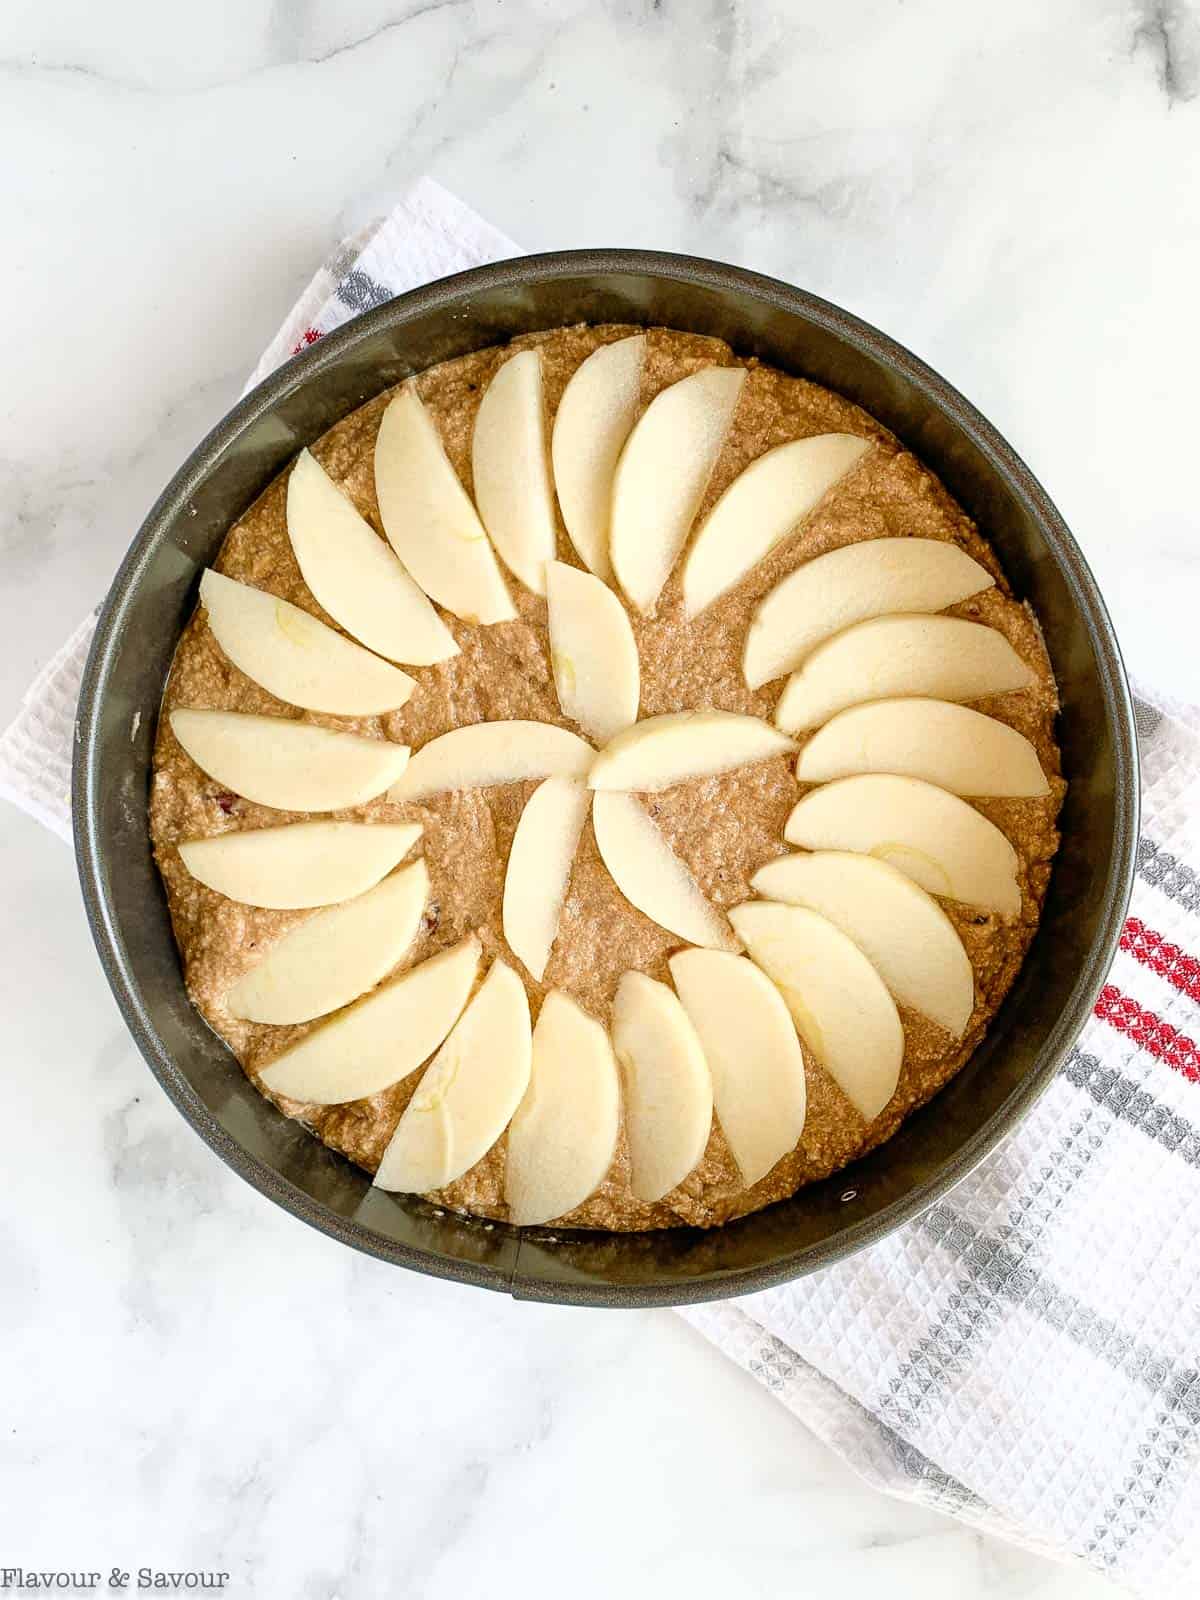 Apple slices arranged in a concentric pattern on top of applesauce cake batter in a springform pan.